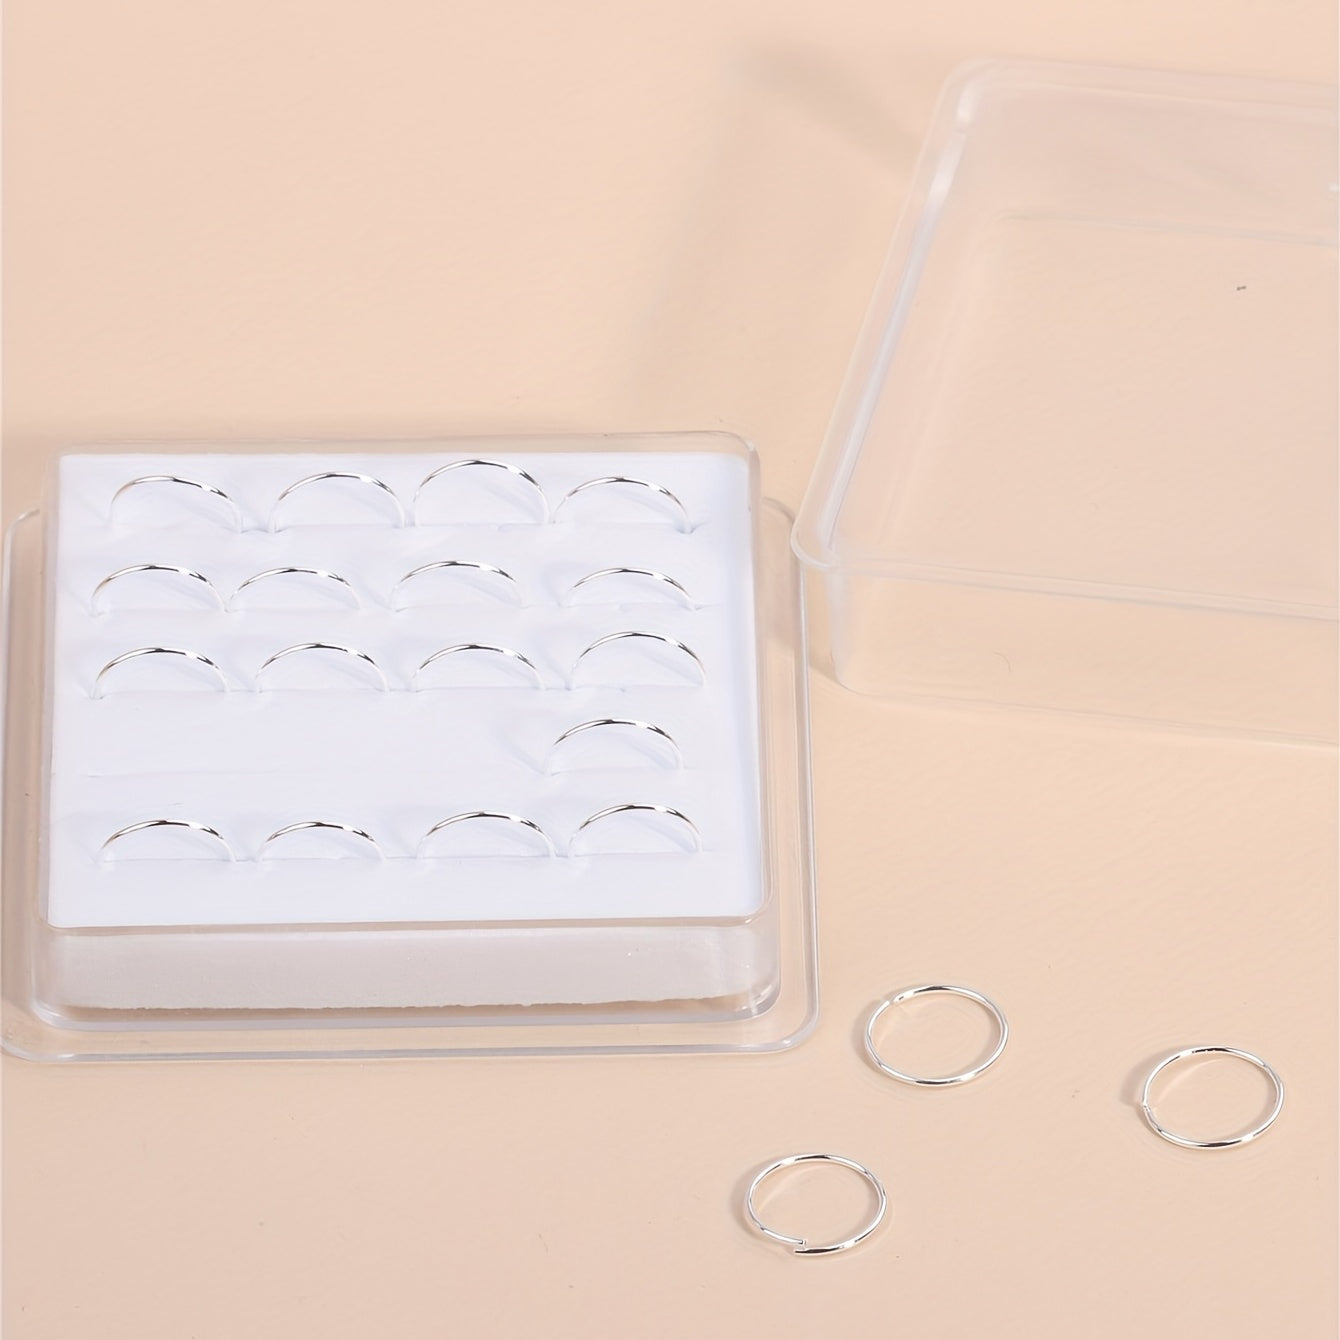 Upgrade Your Nose Game with 20pcs Shiny Zircon Hoops Nose Ring Set - Simple and Minimalist Nose Jewelry Decor